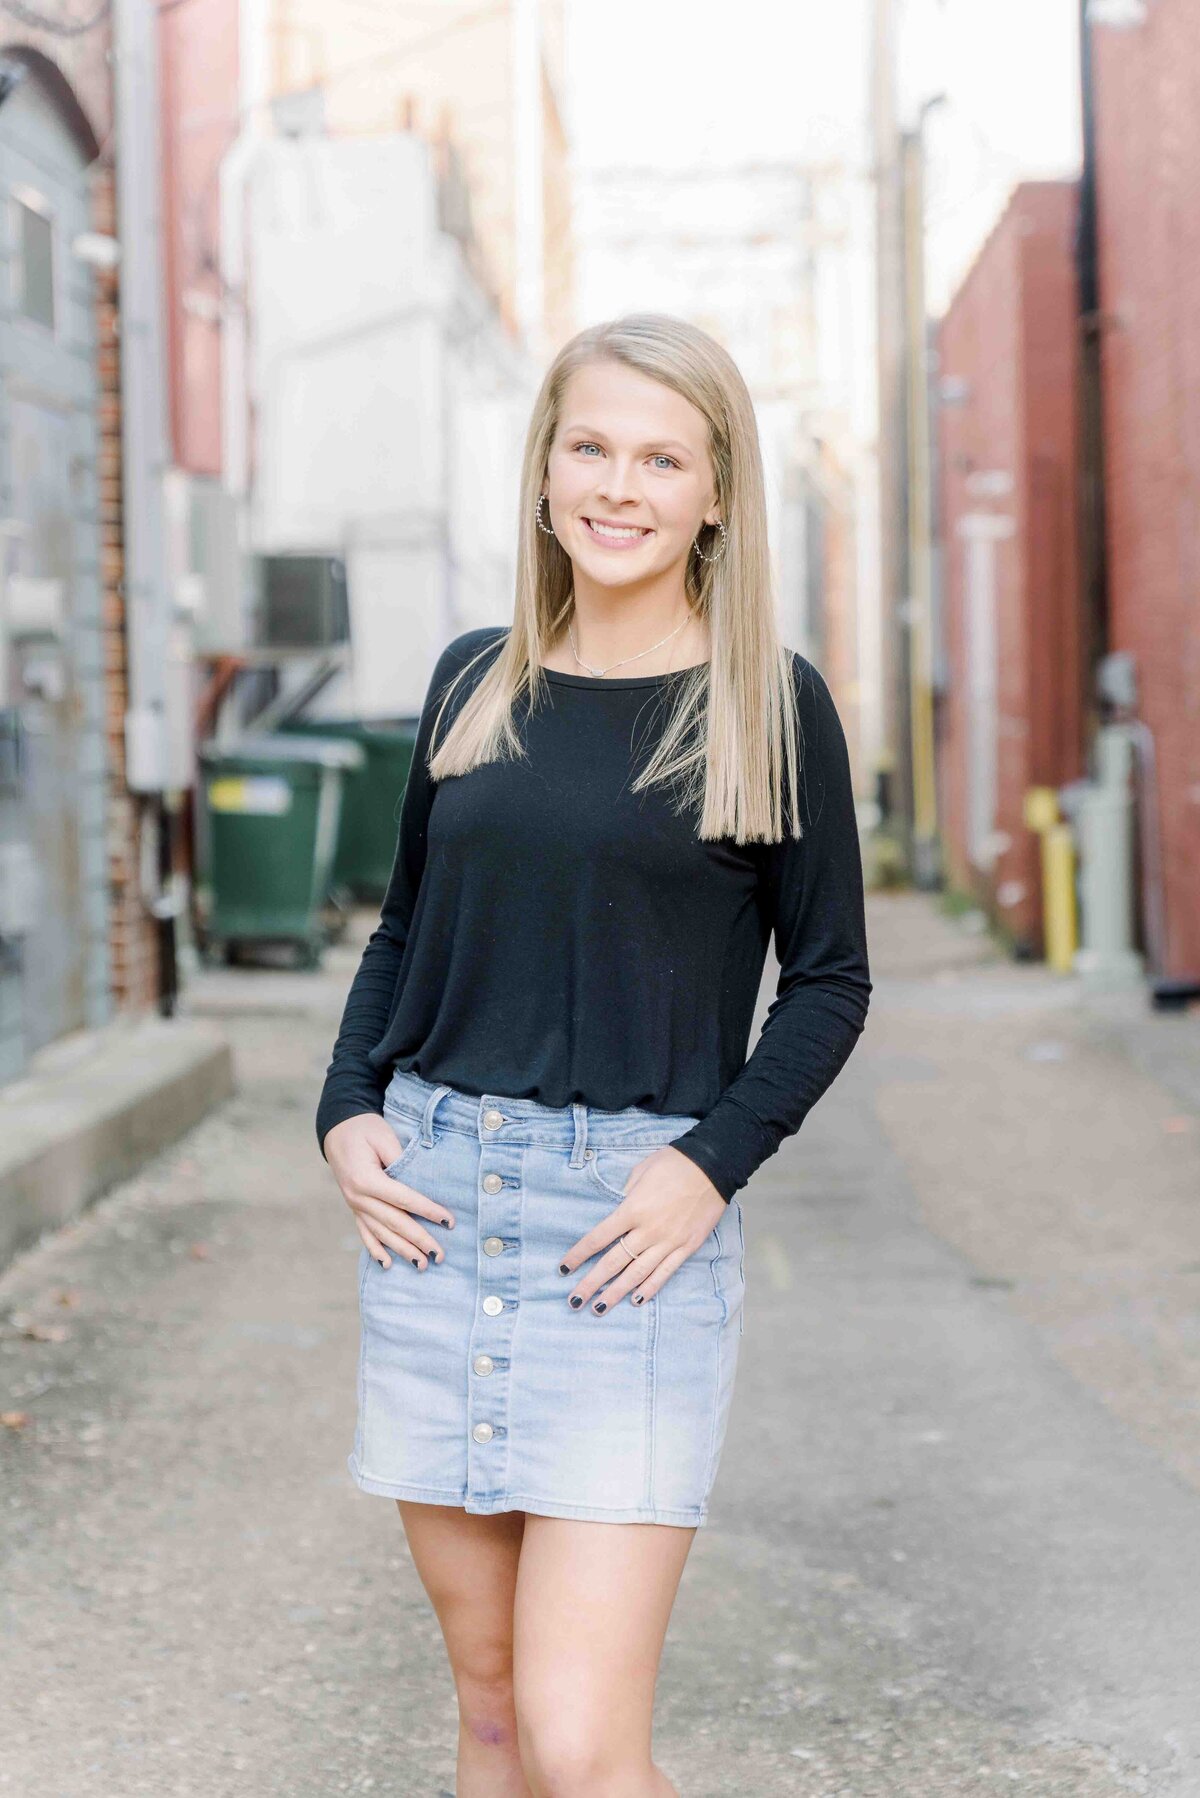 senior girl wearing a jean skirt and black shirt standing in the alley way